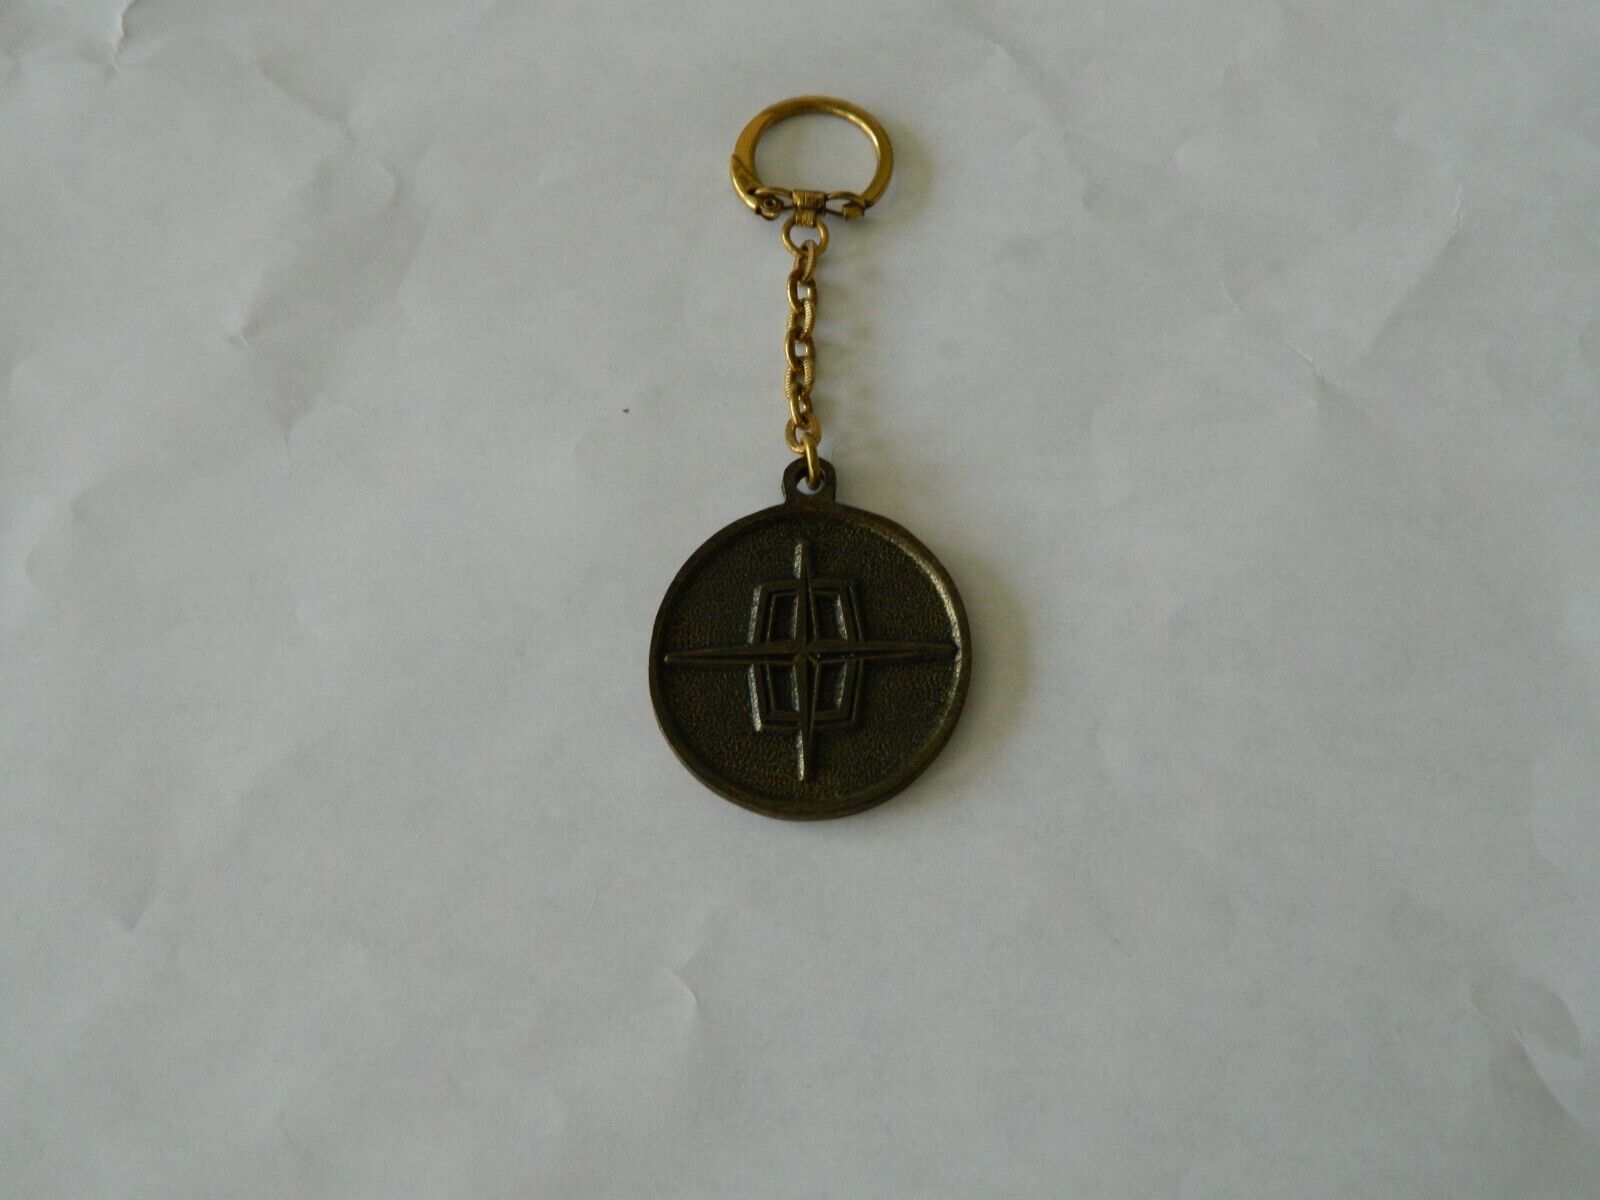 Vintage Lincoln Key Chain-Dealer Issued